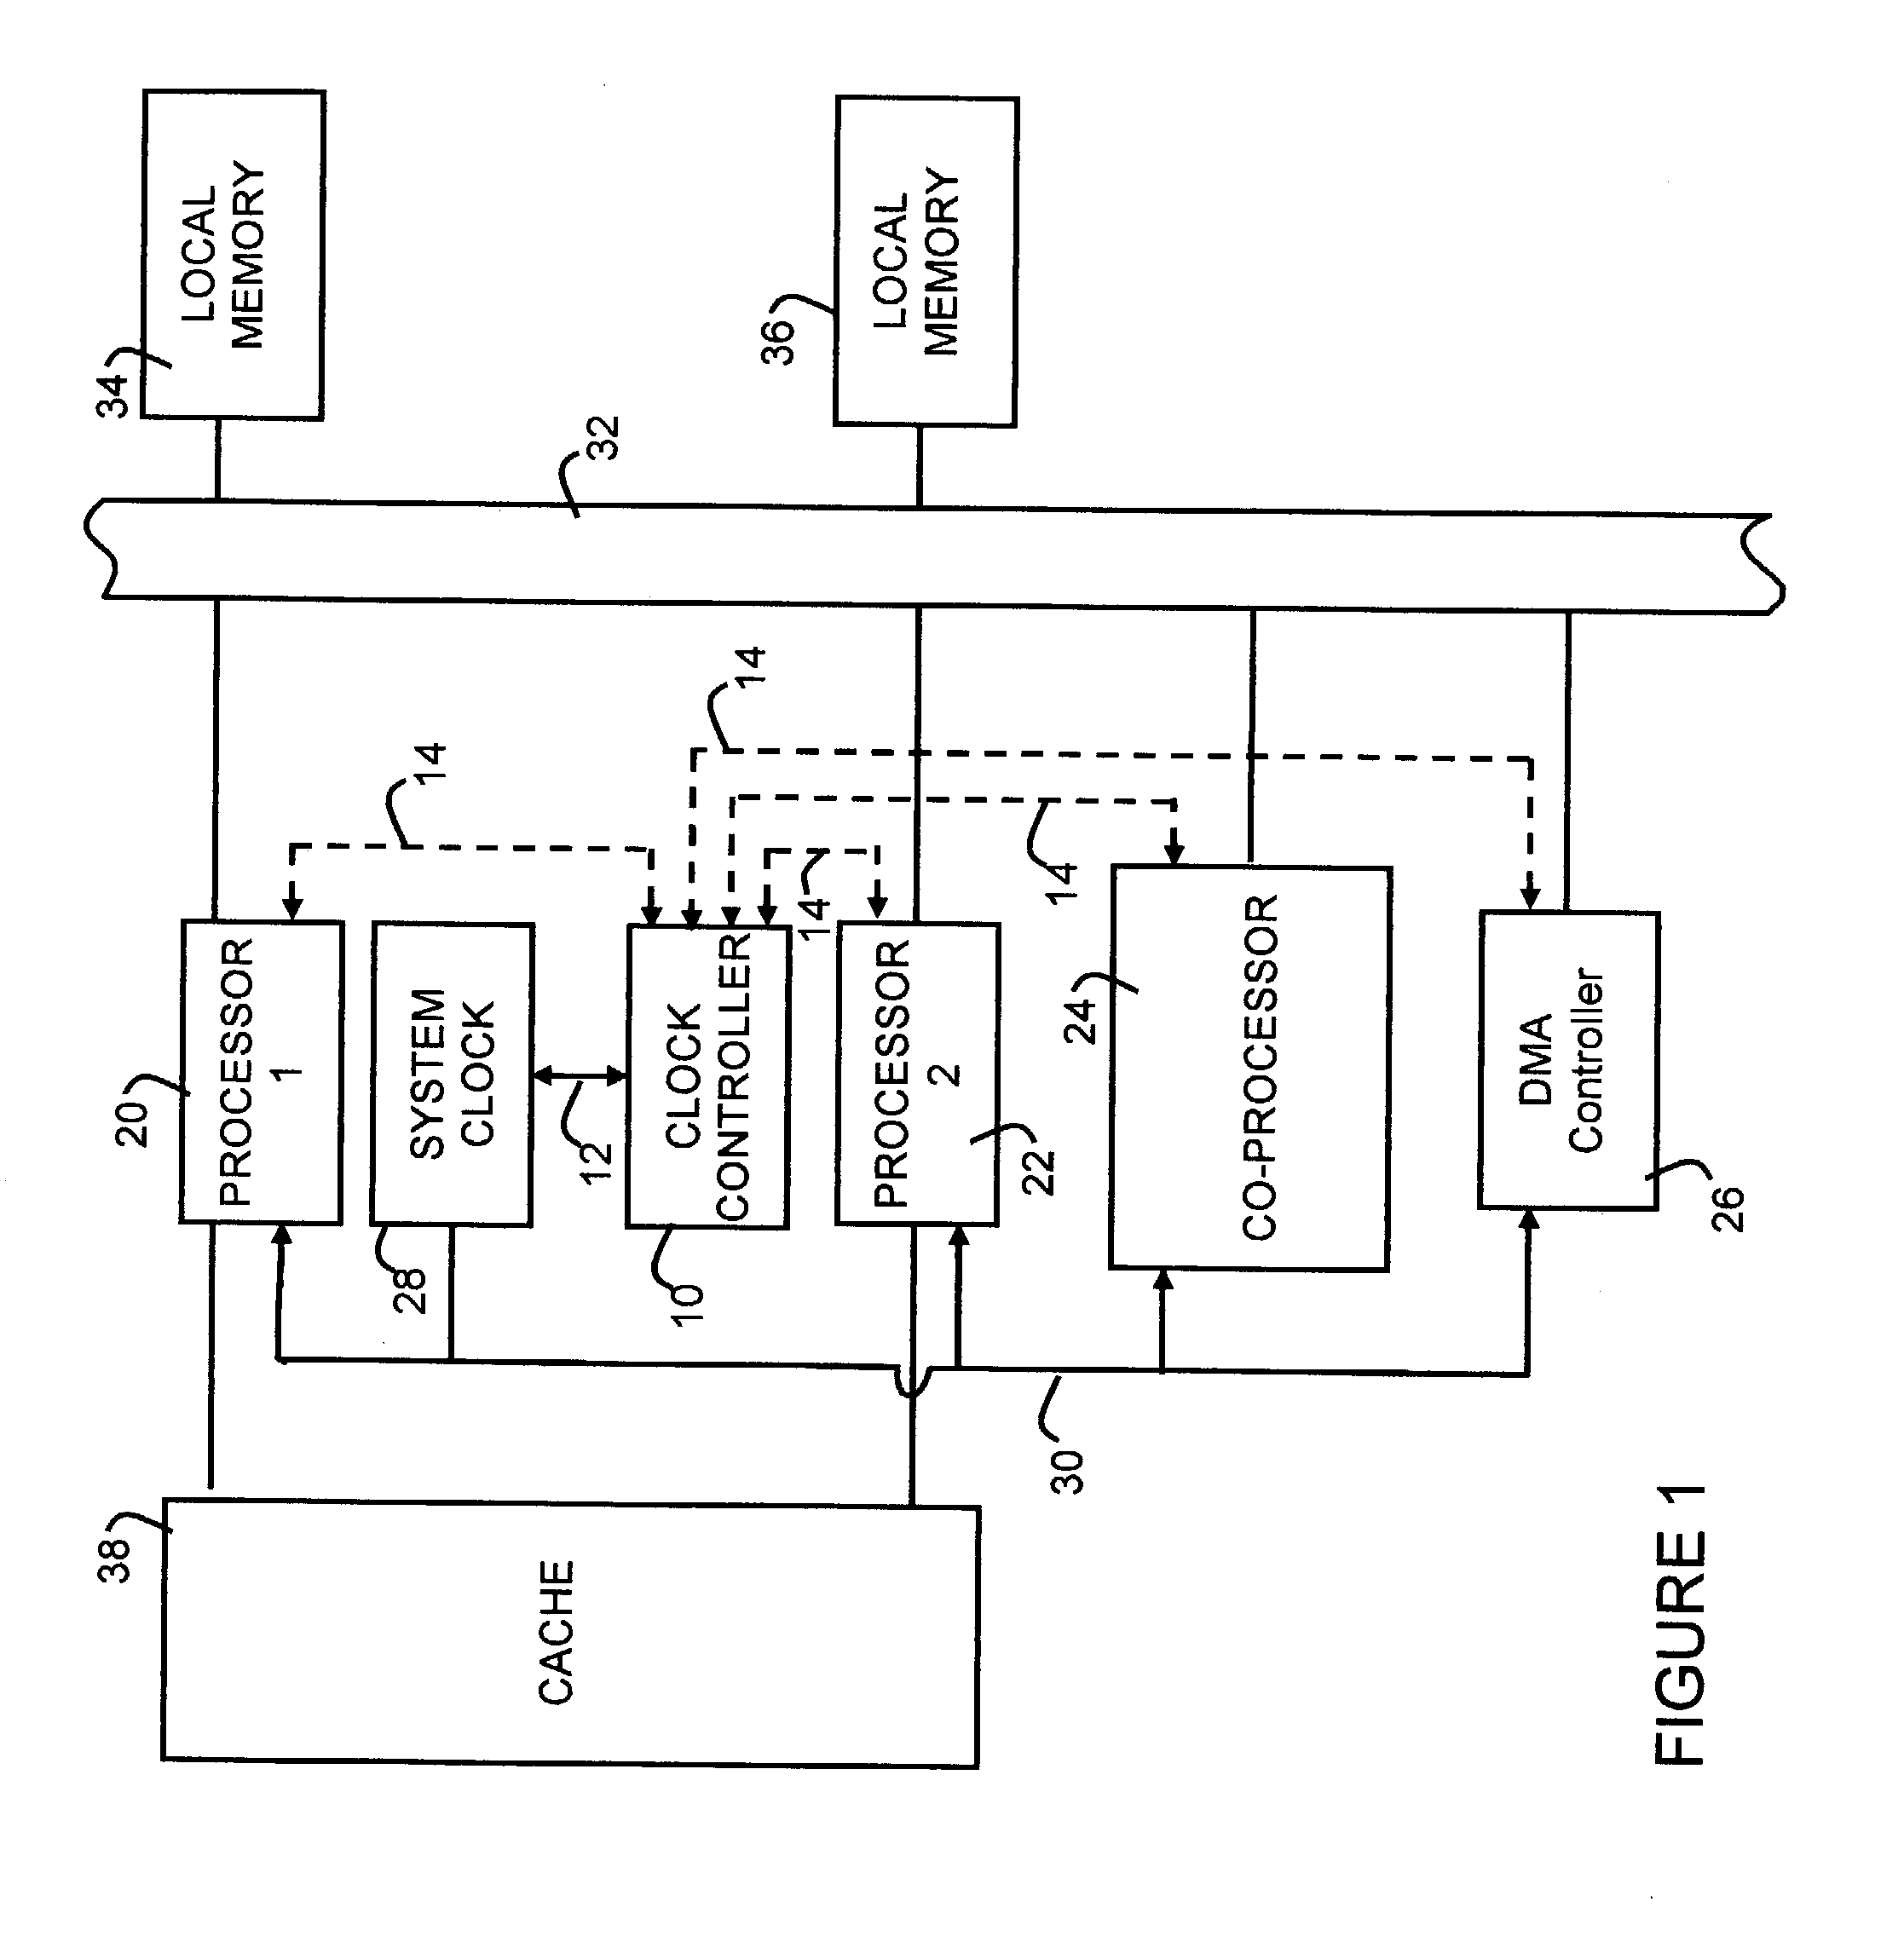 System clock power management for chips with multiple processing modules